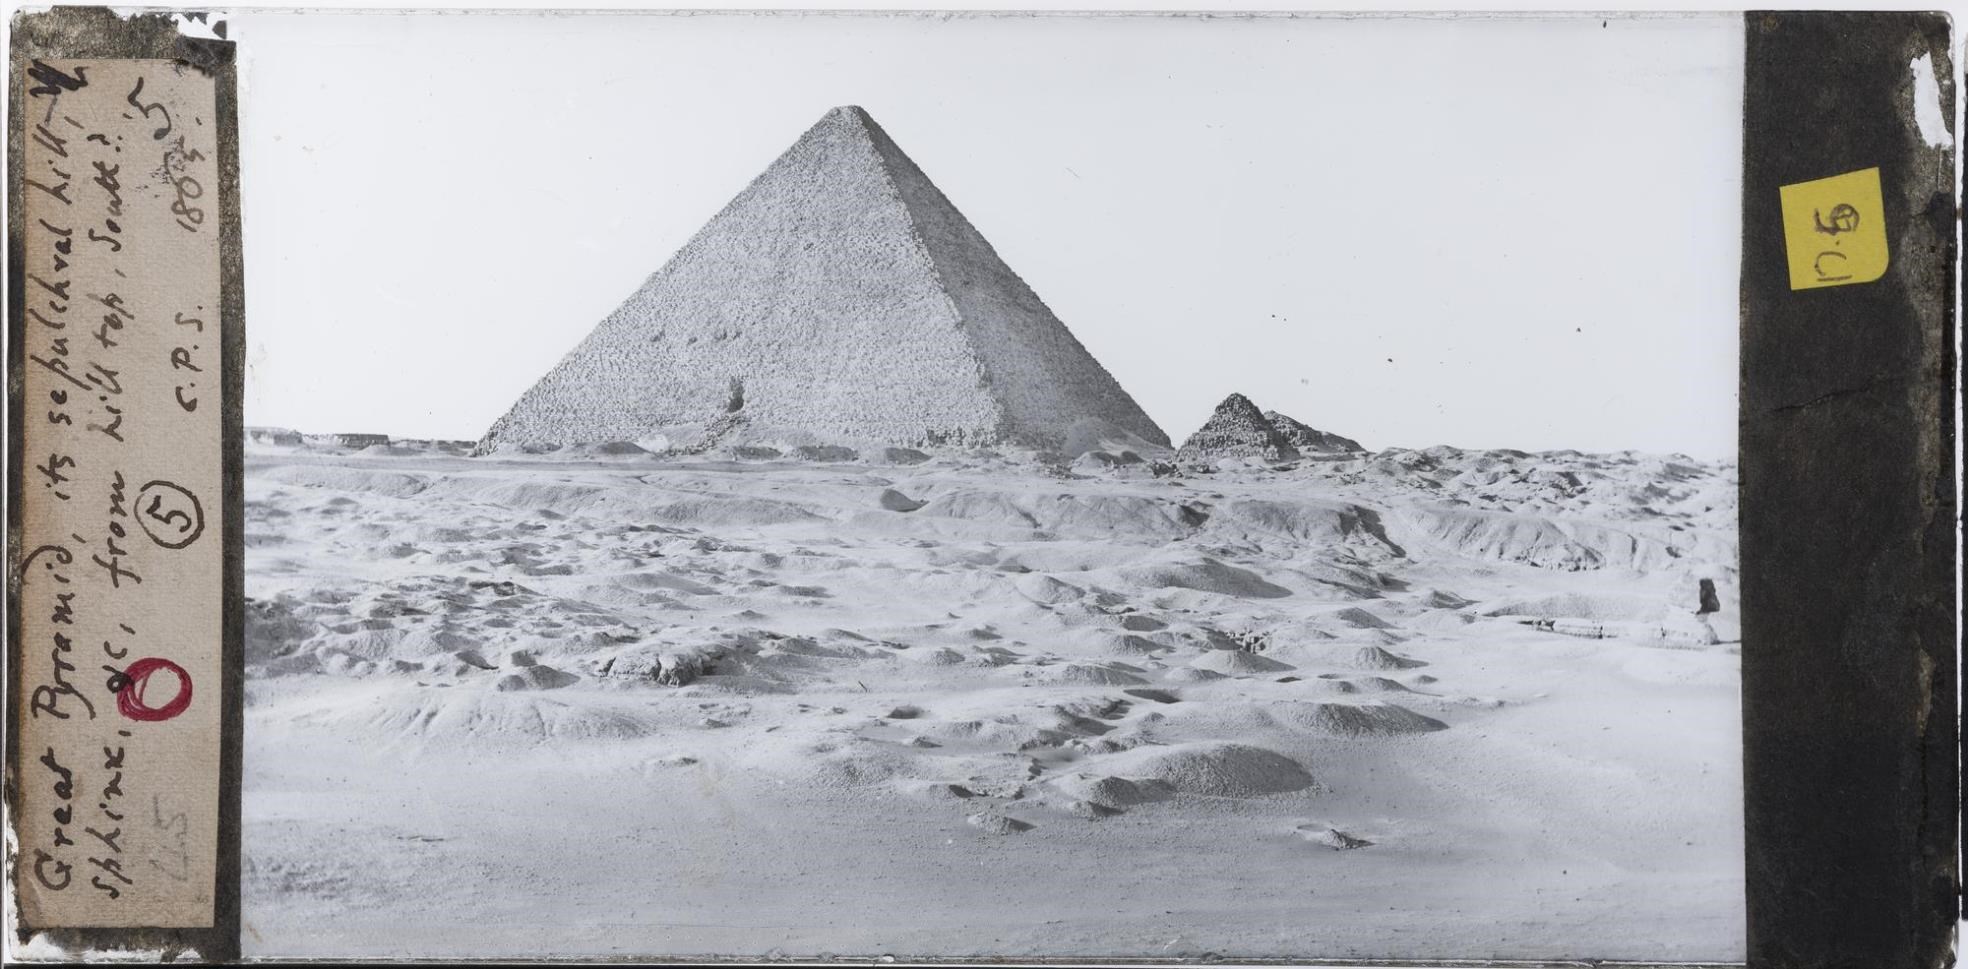 Above: Glass plate photographic negative taken in 1865 by Charles Piazzi Smyth of the 'Great Pyramid, its sepulchral hill, the Sphinx, &c, from hill top, south?' © Royal Observatory Edinburgh CPS Archives.